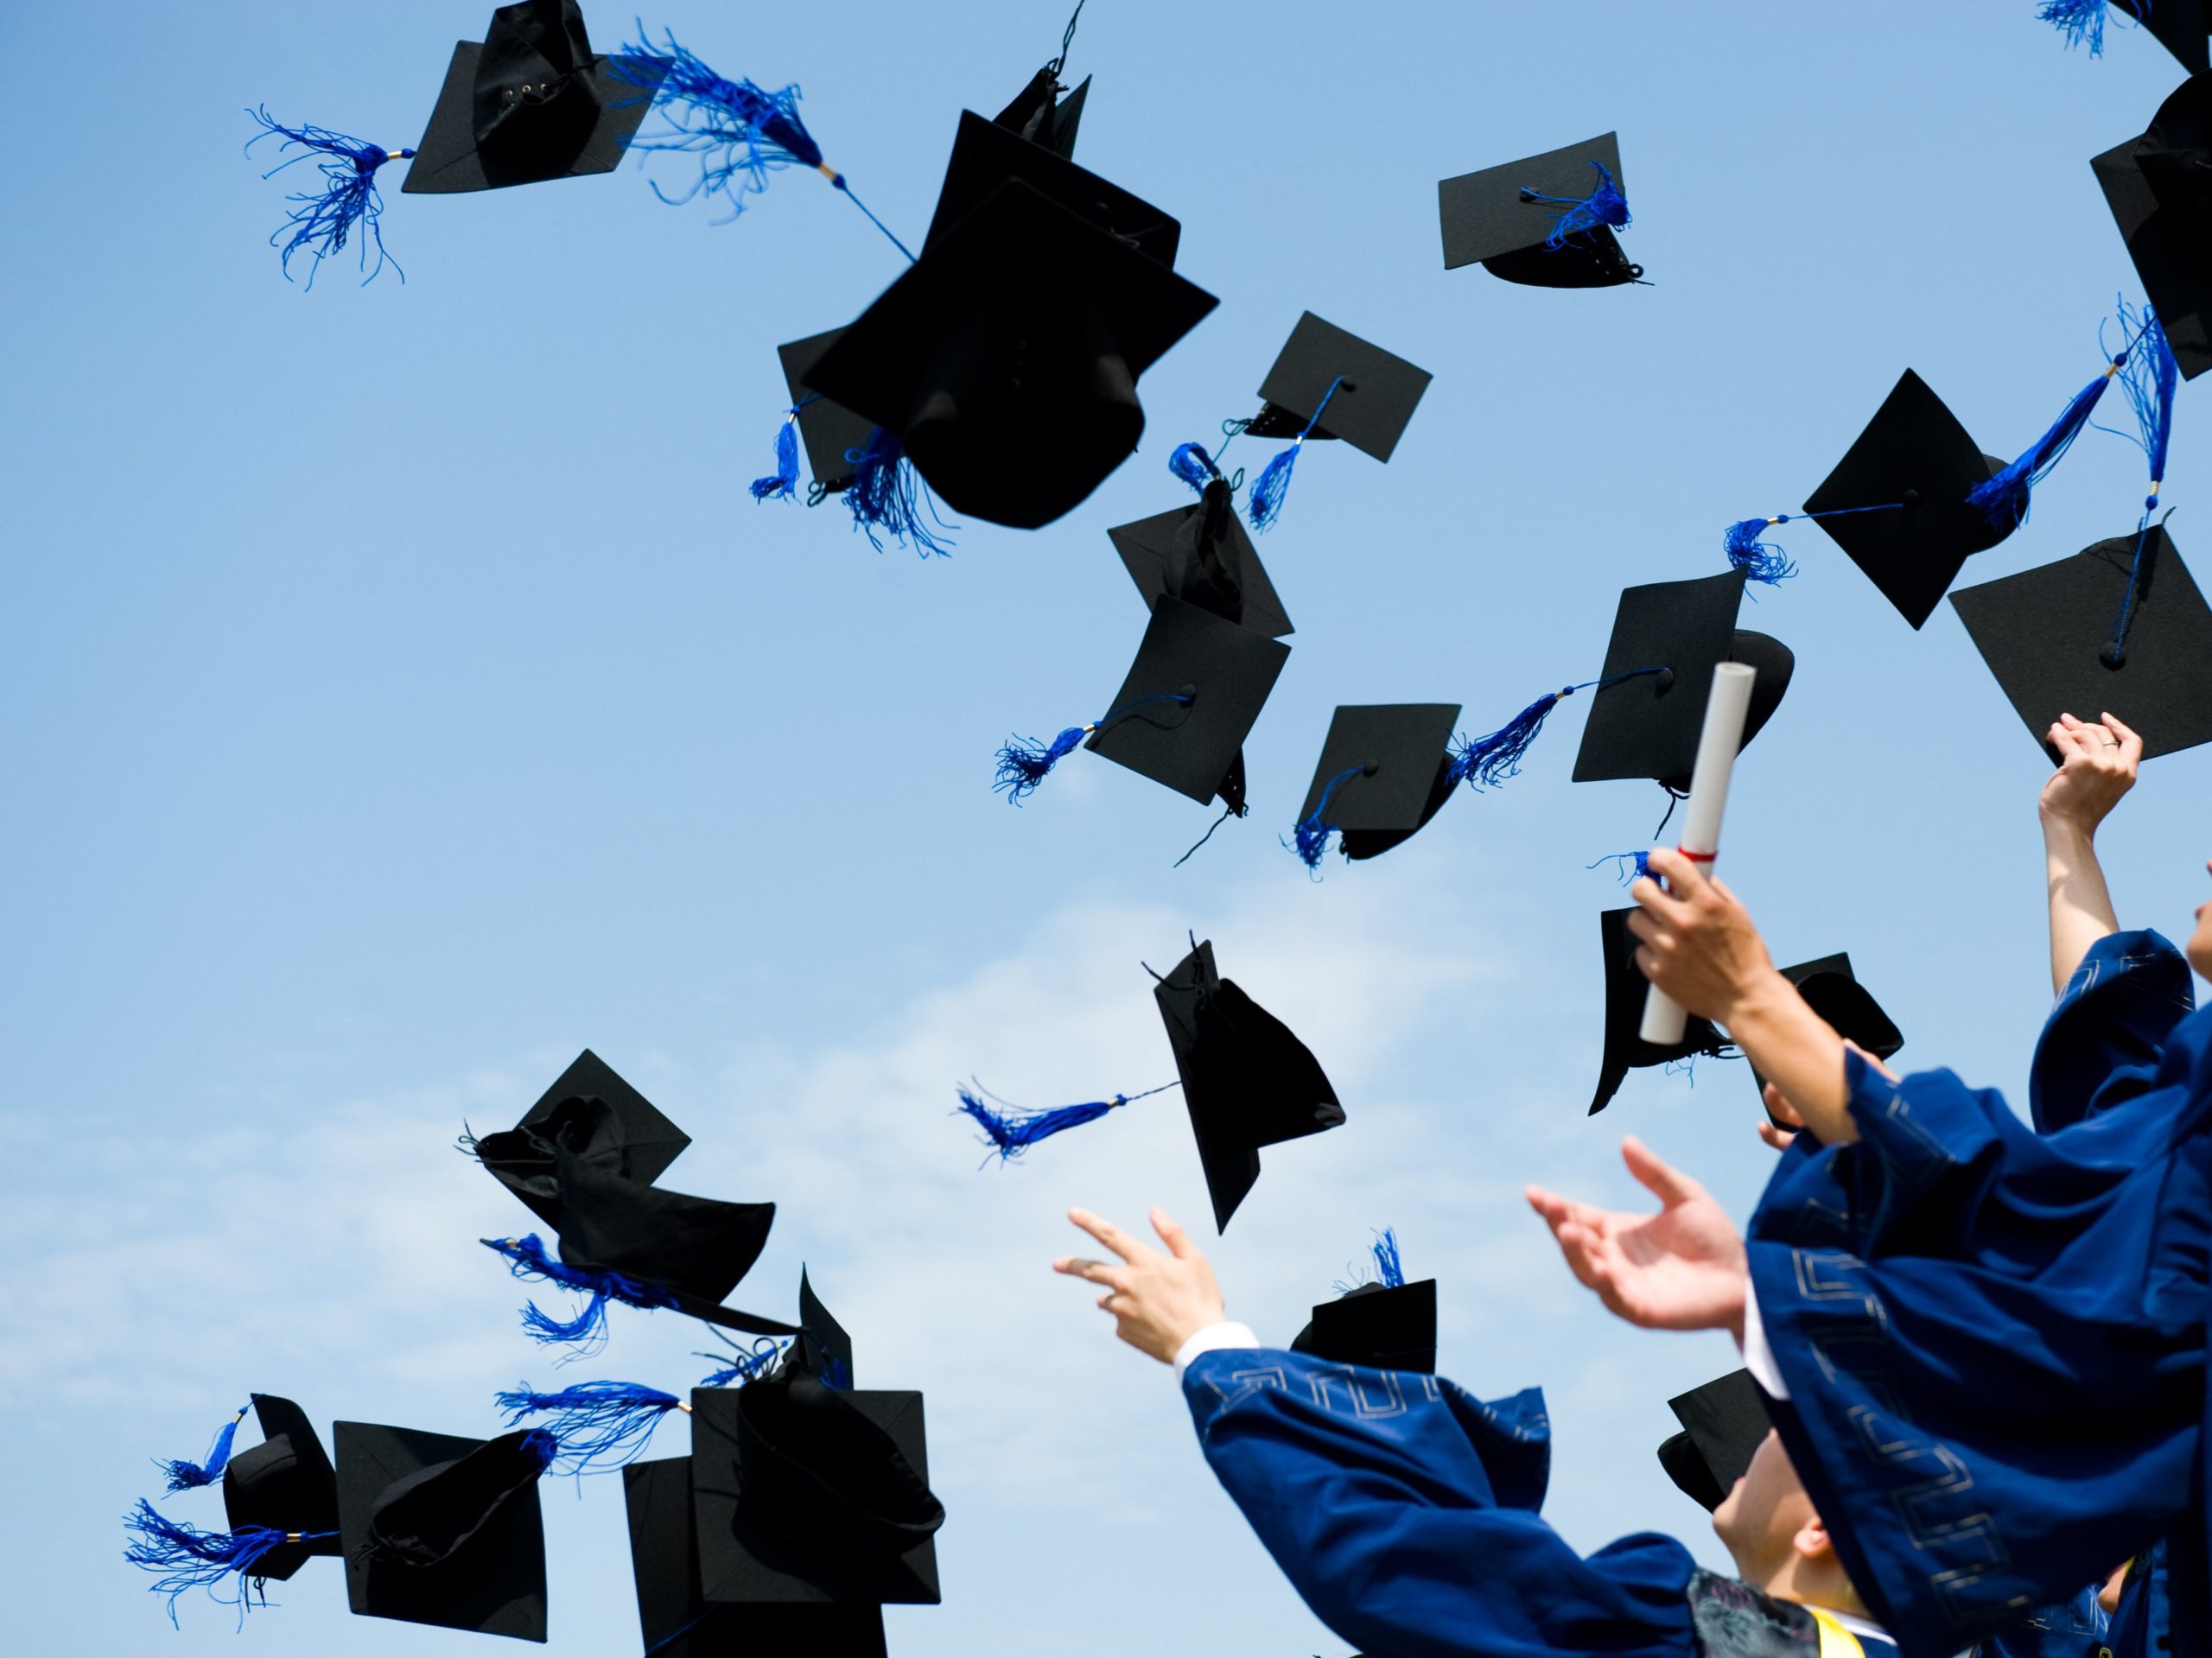 Student Loan Company reveals the highest loan debt accumulated by a single student